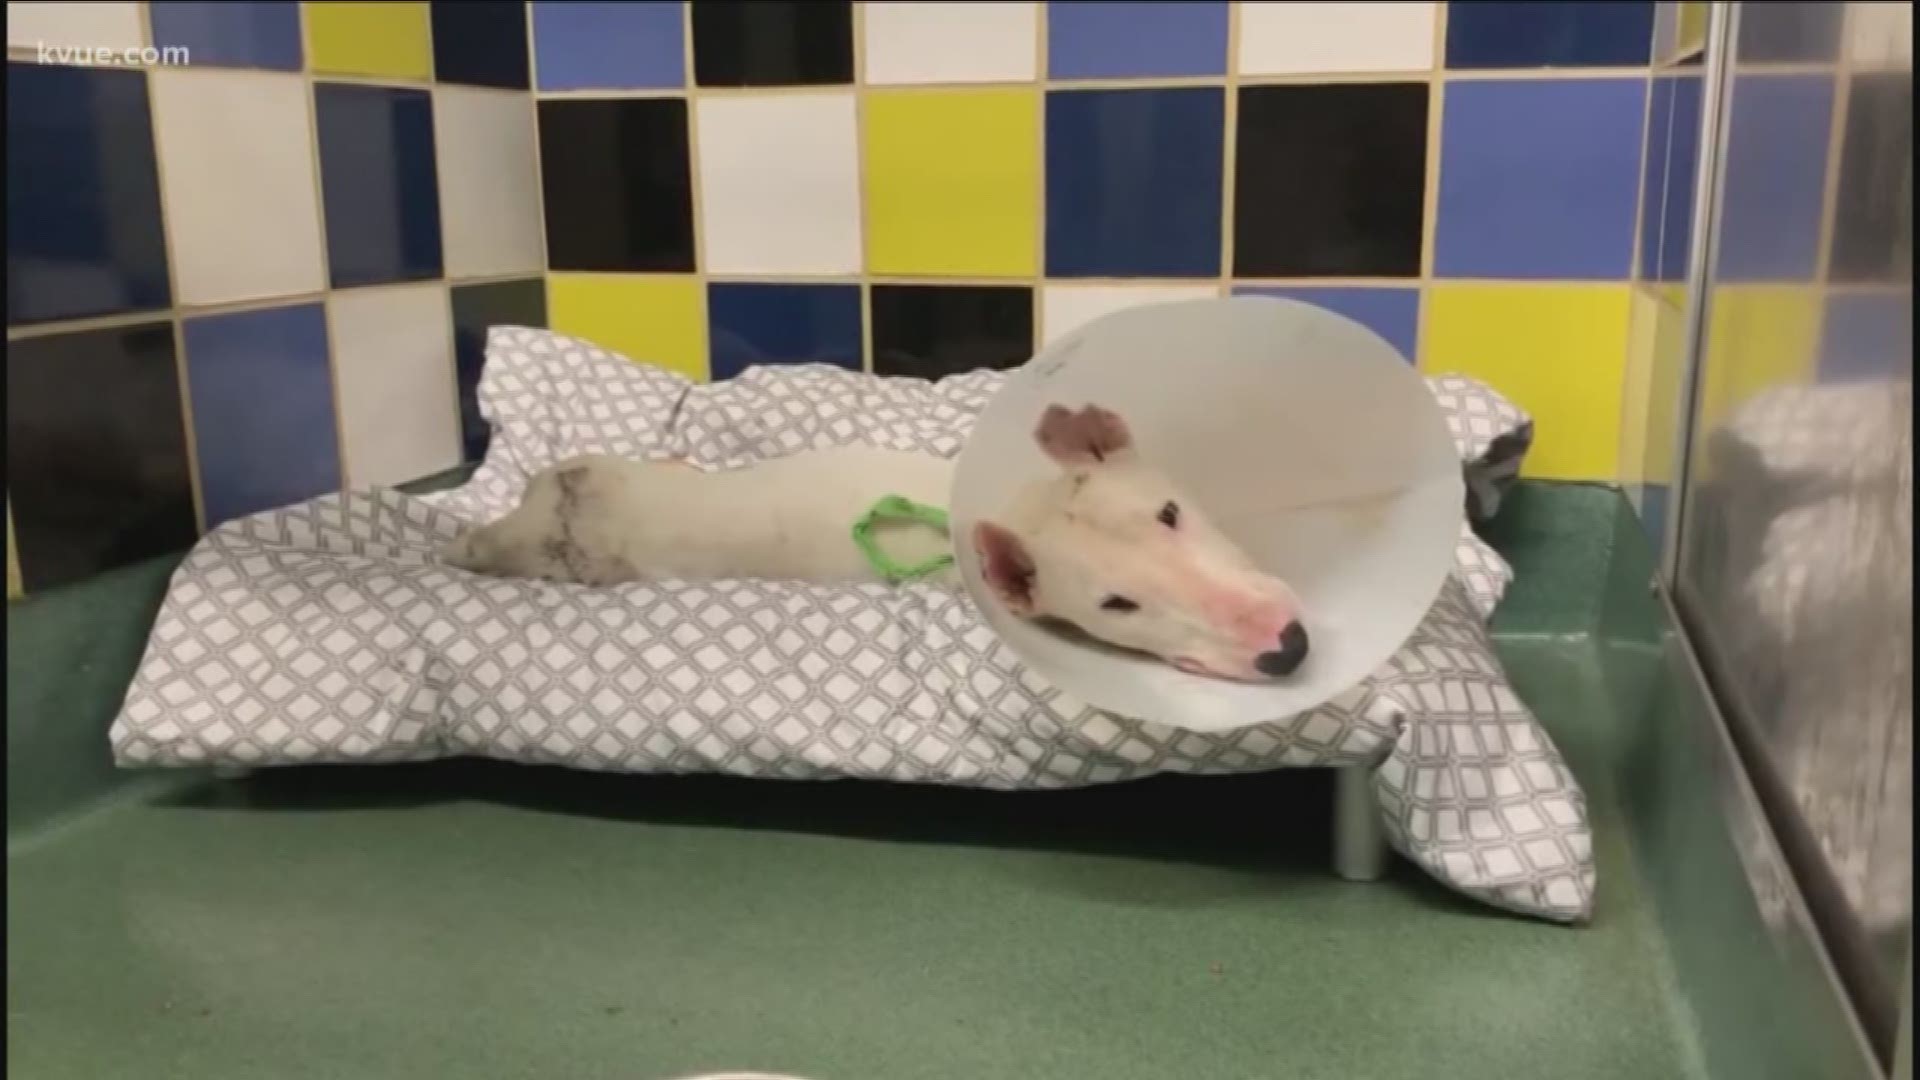 A dog who suffered terrible abuse is still recovering and he's also still getting a lot of support form the community.